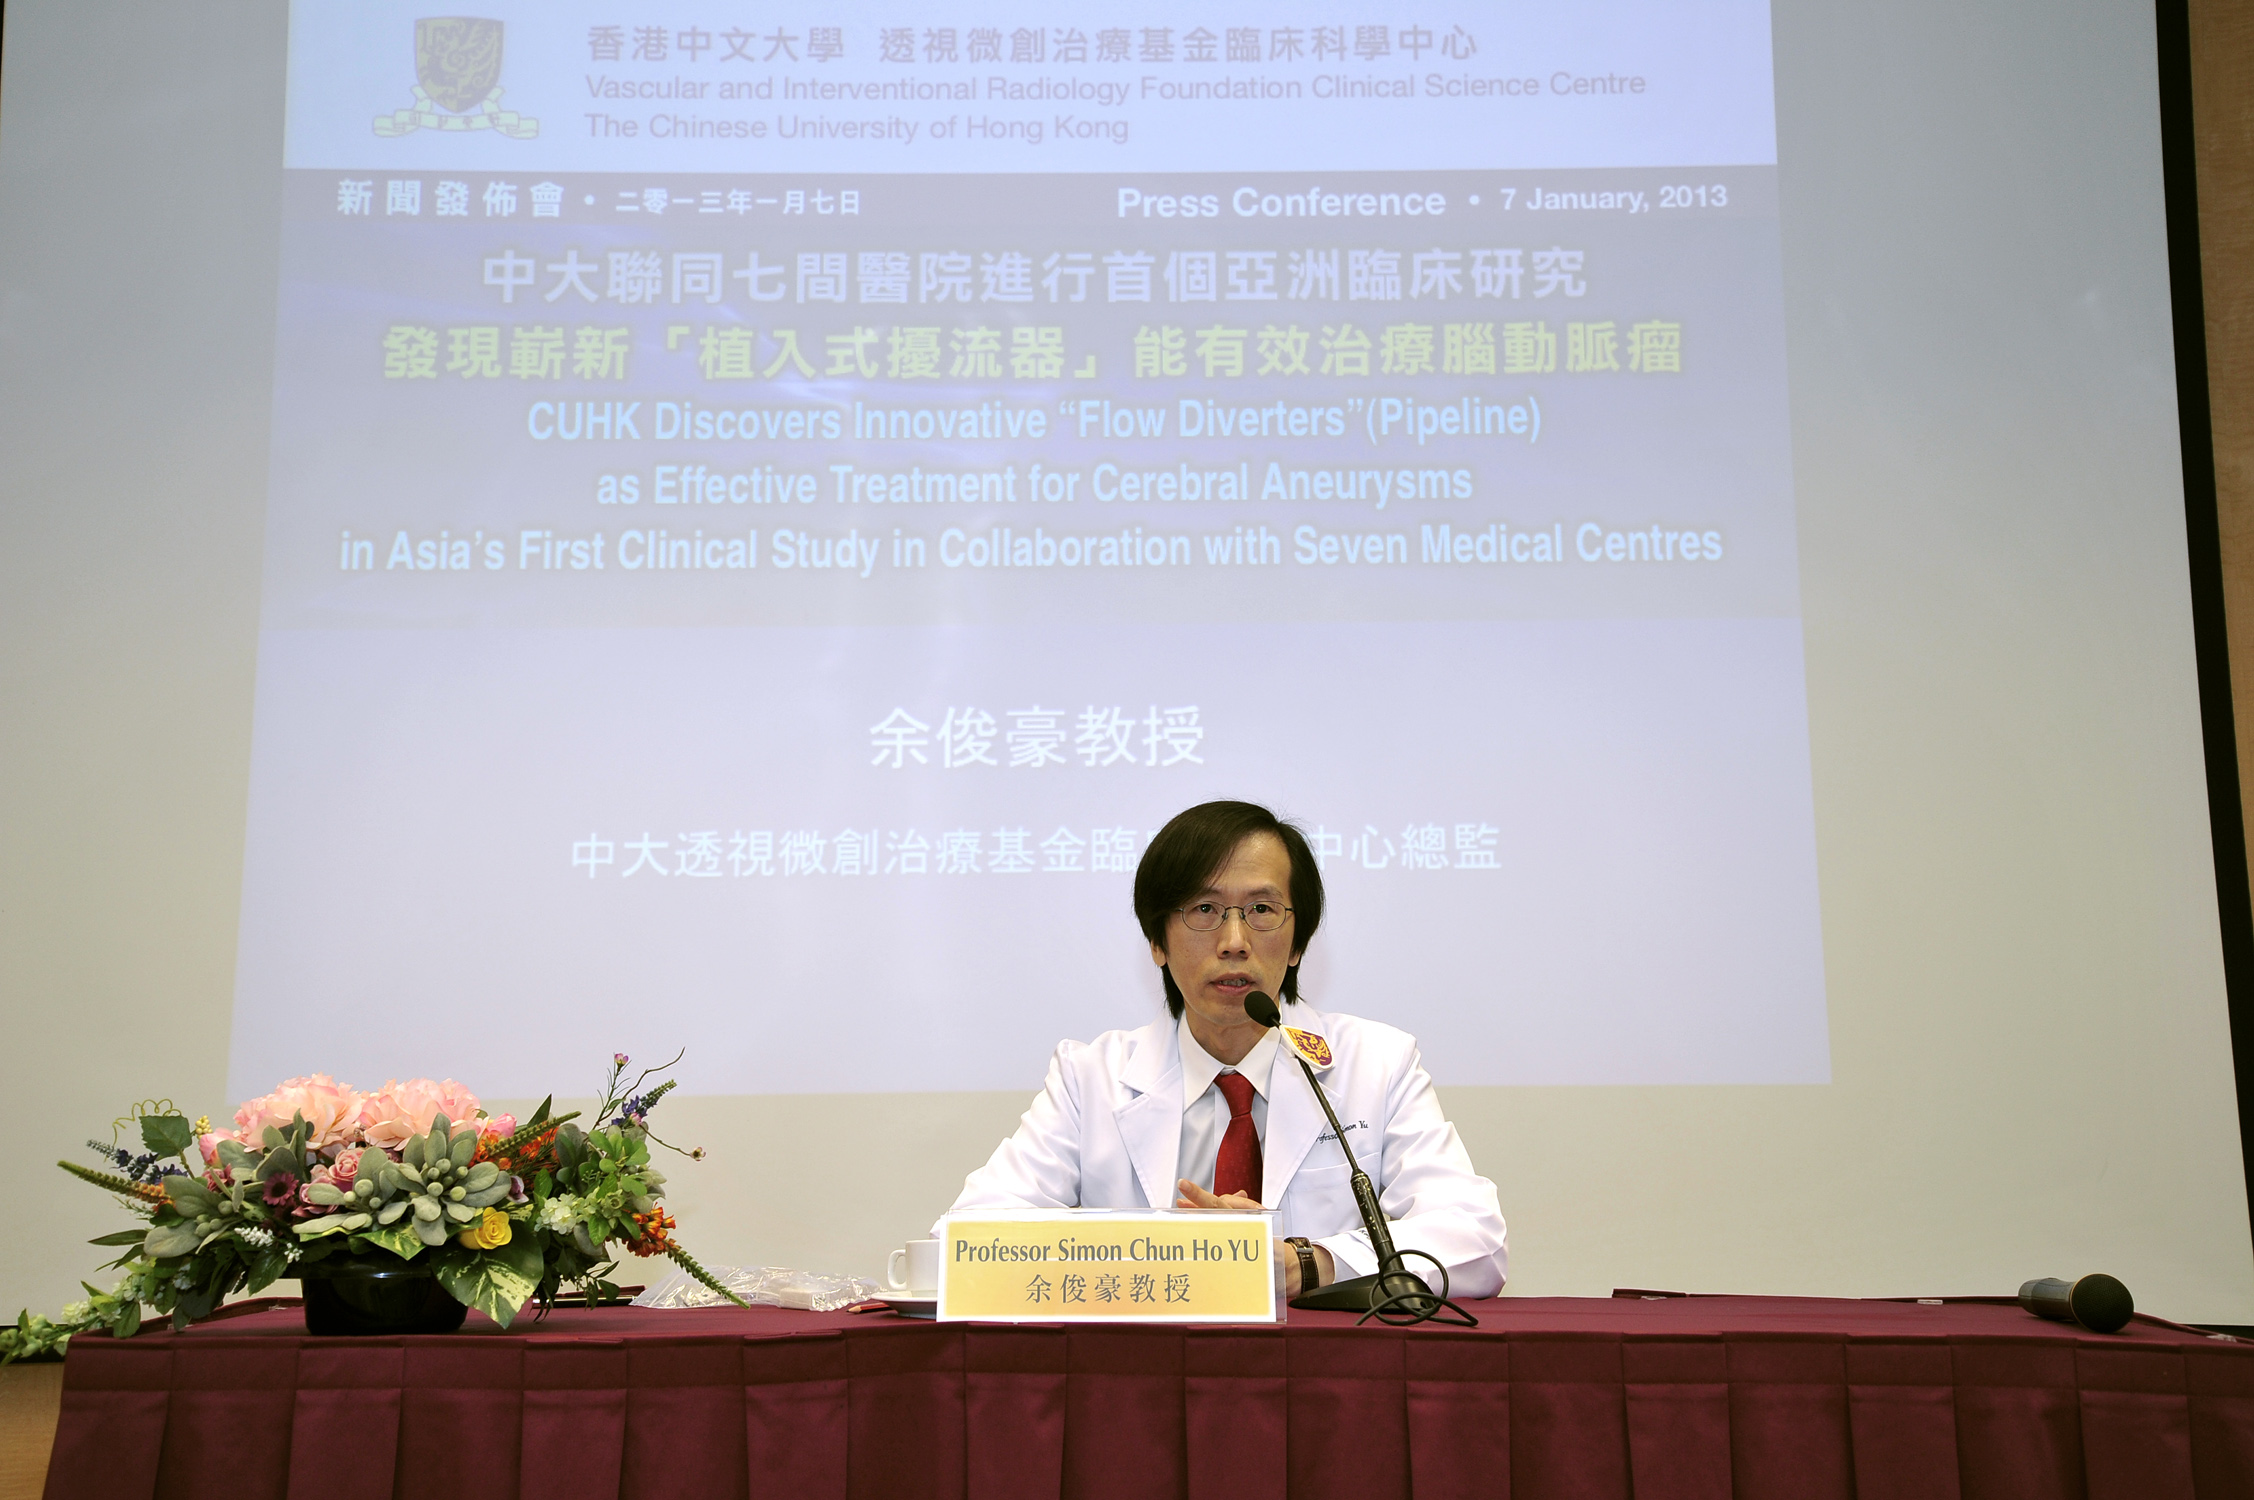 Professor Simon Chun Ho YU, Professor, Department of Imaging and Interventional Radiology and Director of Vascular and Interventional Radiology Foundation Clinical Science Centre, CUHK present the Asia's first clinical study in collaboration with seven medical centres on the innovative flow diverters (Pipeline) for treating cerebral aneurysms